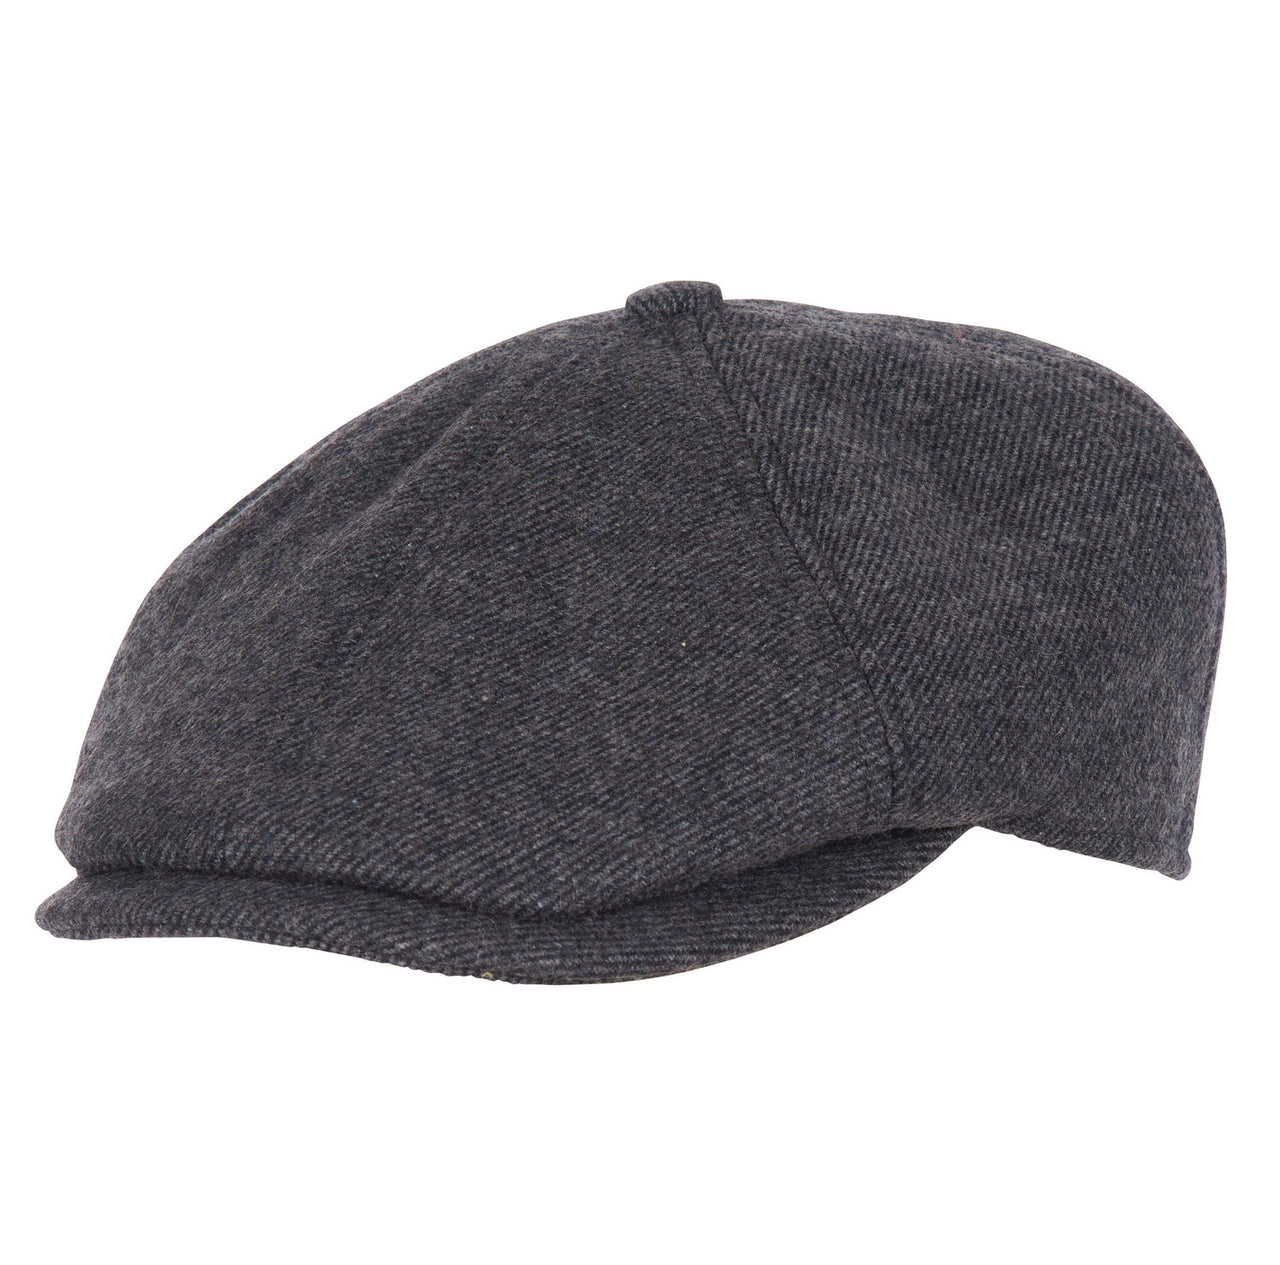 Barbour Claymore Baker - Charcoal